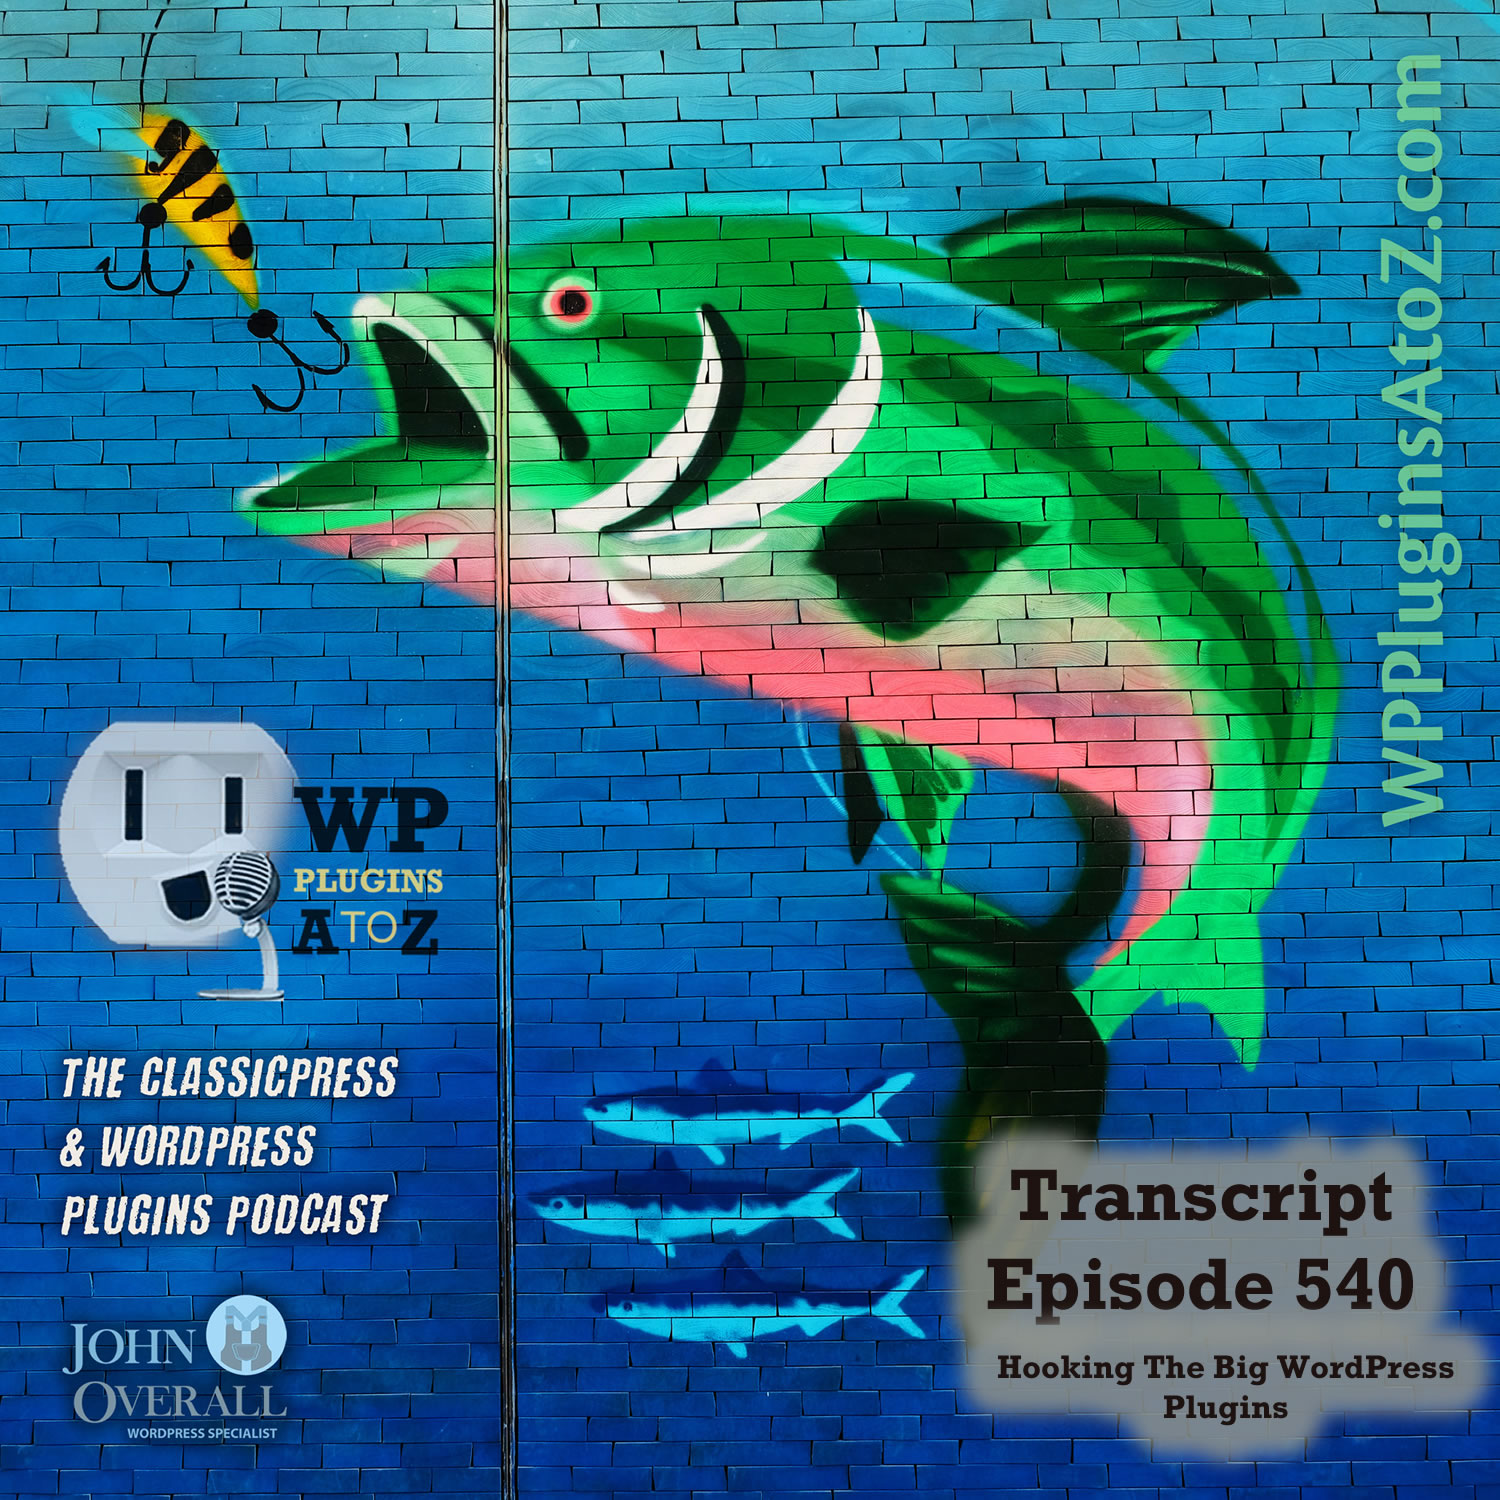 Transcript for Episode 540 and we have plugins for ShortCode Rumbles, Multi-Count Down, Restricting Users, Black Listing, Karen's Dark Mode, Vaptcha... and ClassicPress Options. It's all coming up on WordPress Plugins A-Z!